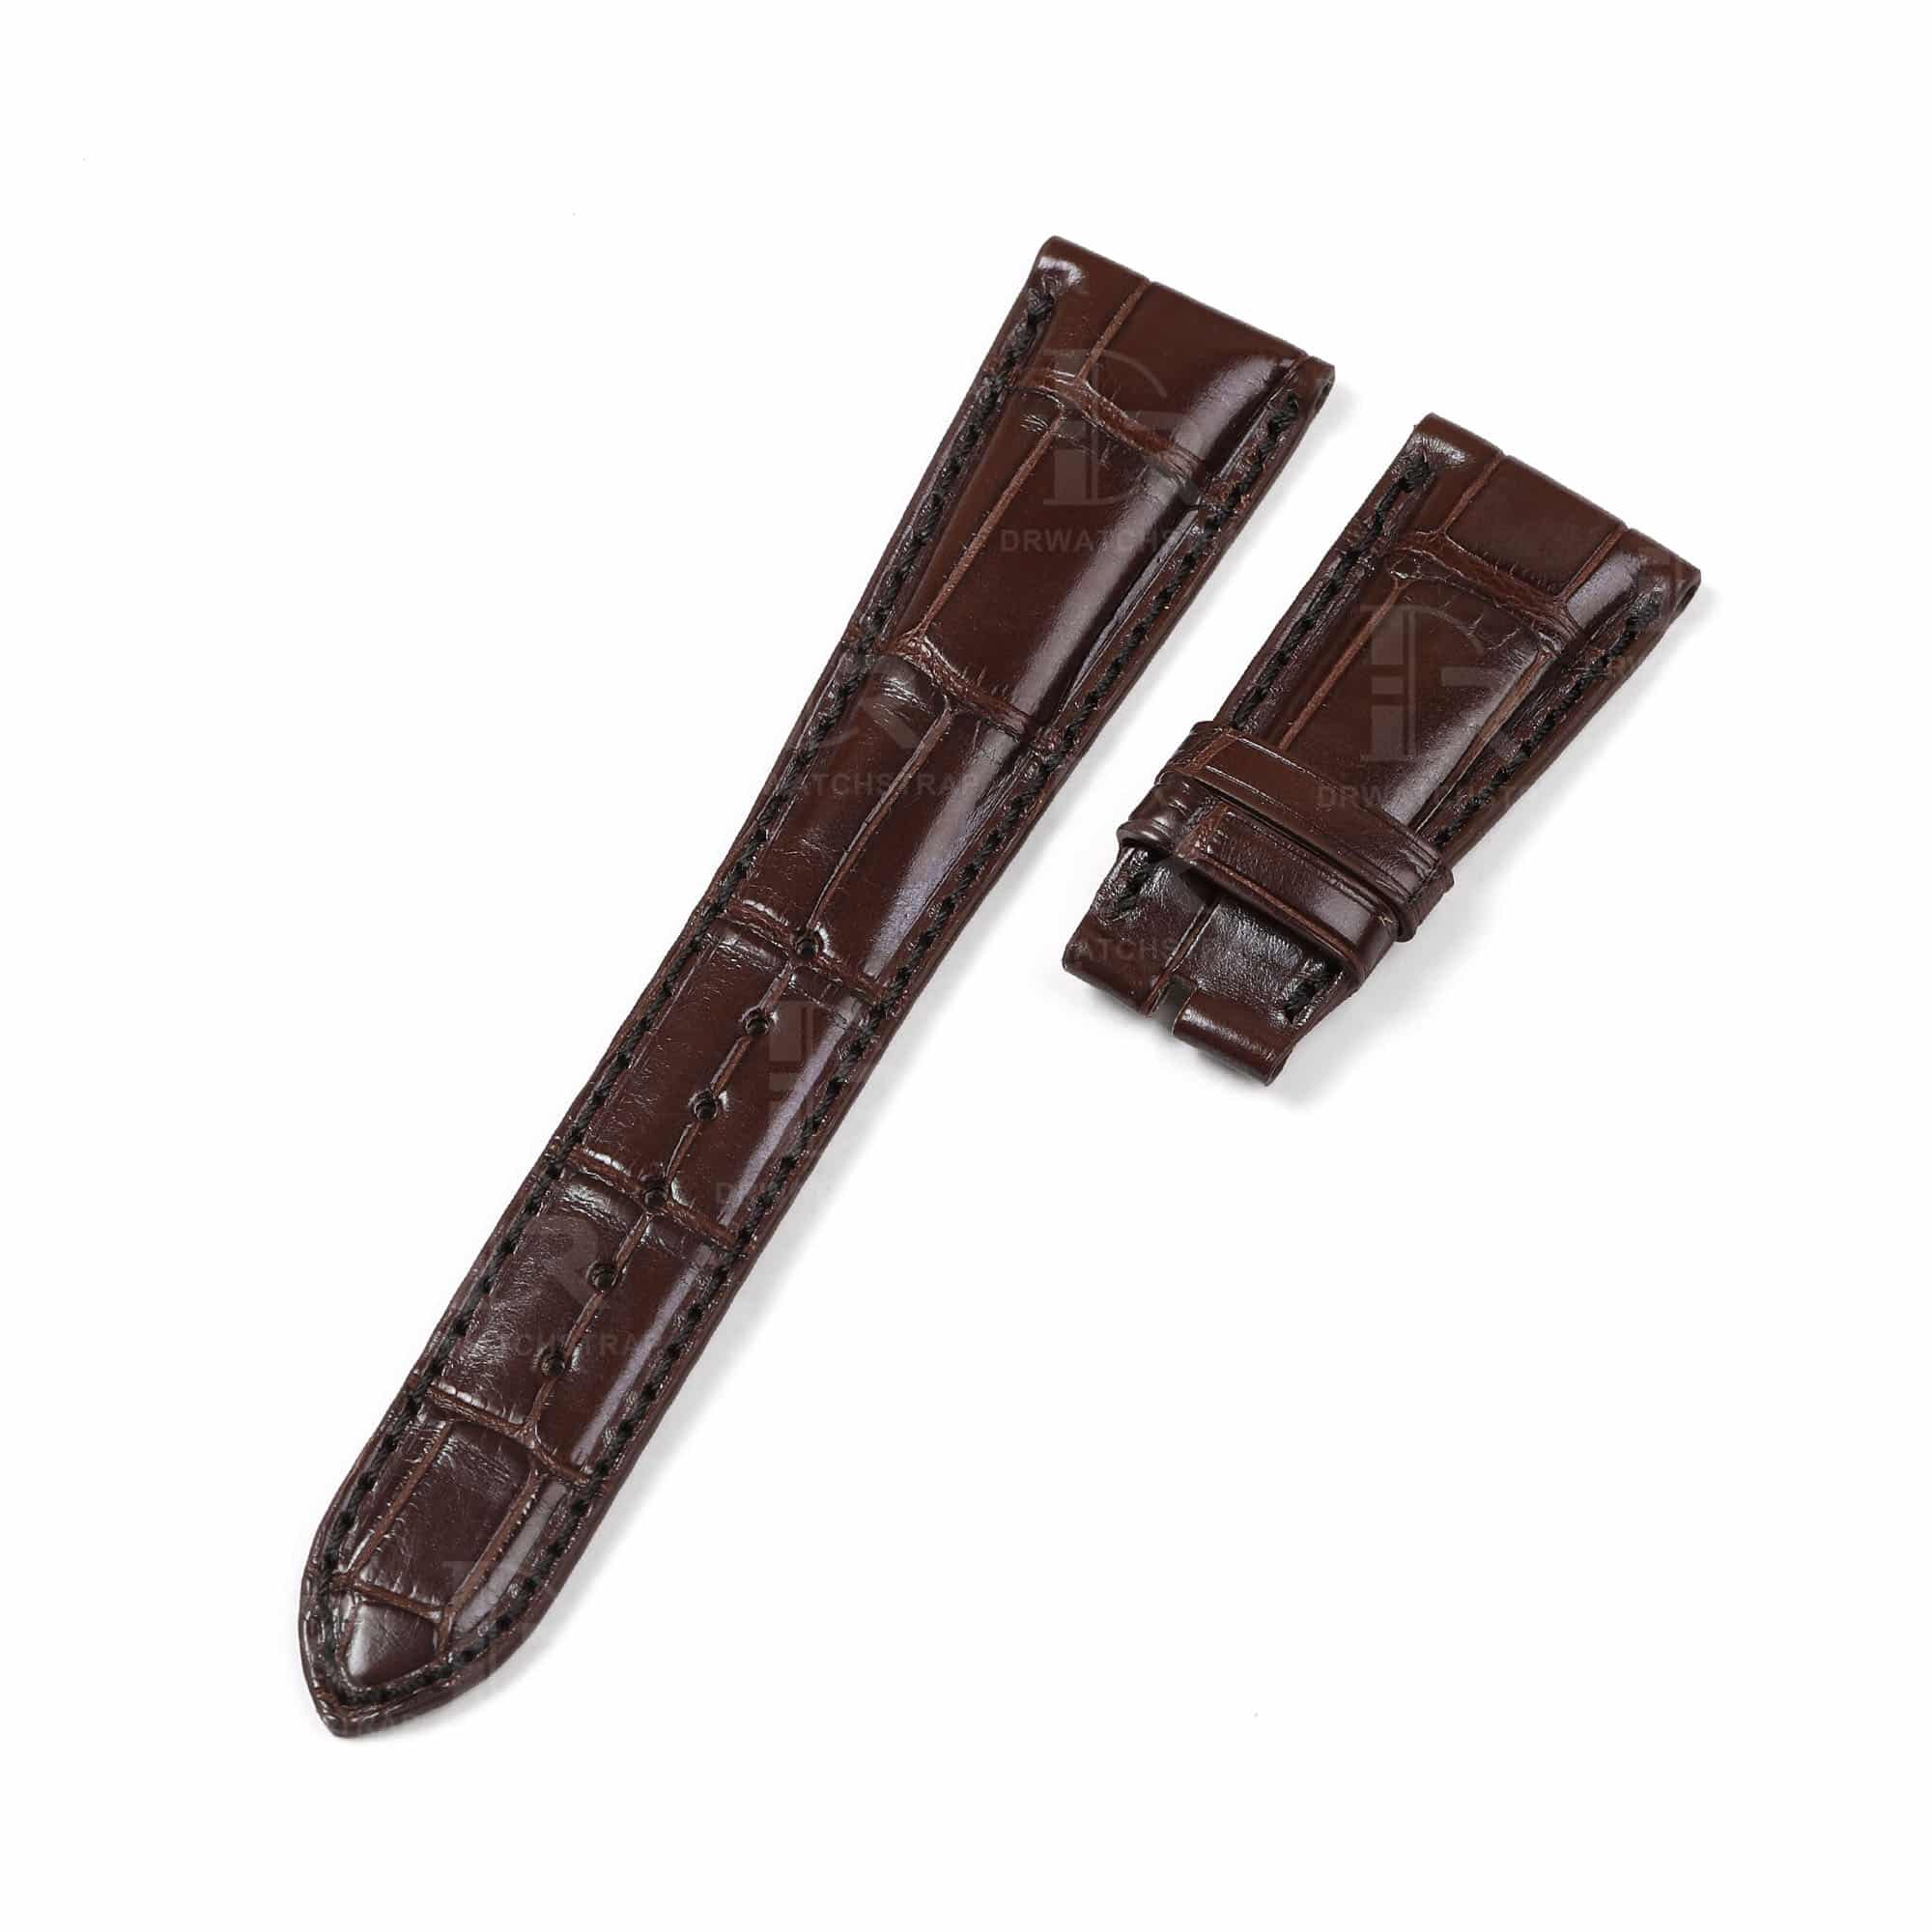 Buy Custom Patek Philippe grand Brown Alligator Leather strap Replacement watchbands